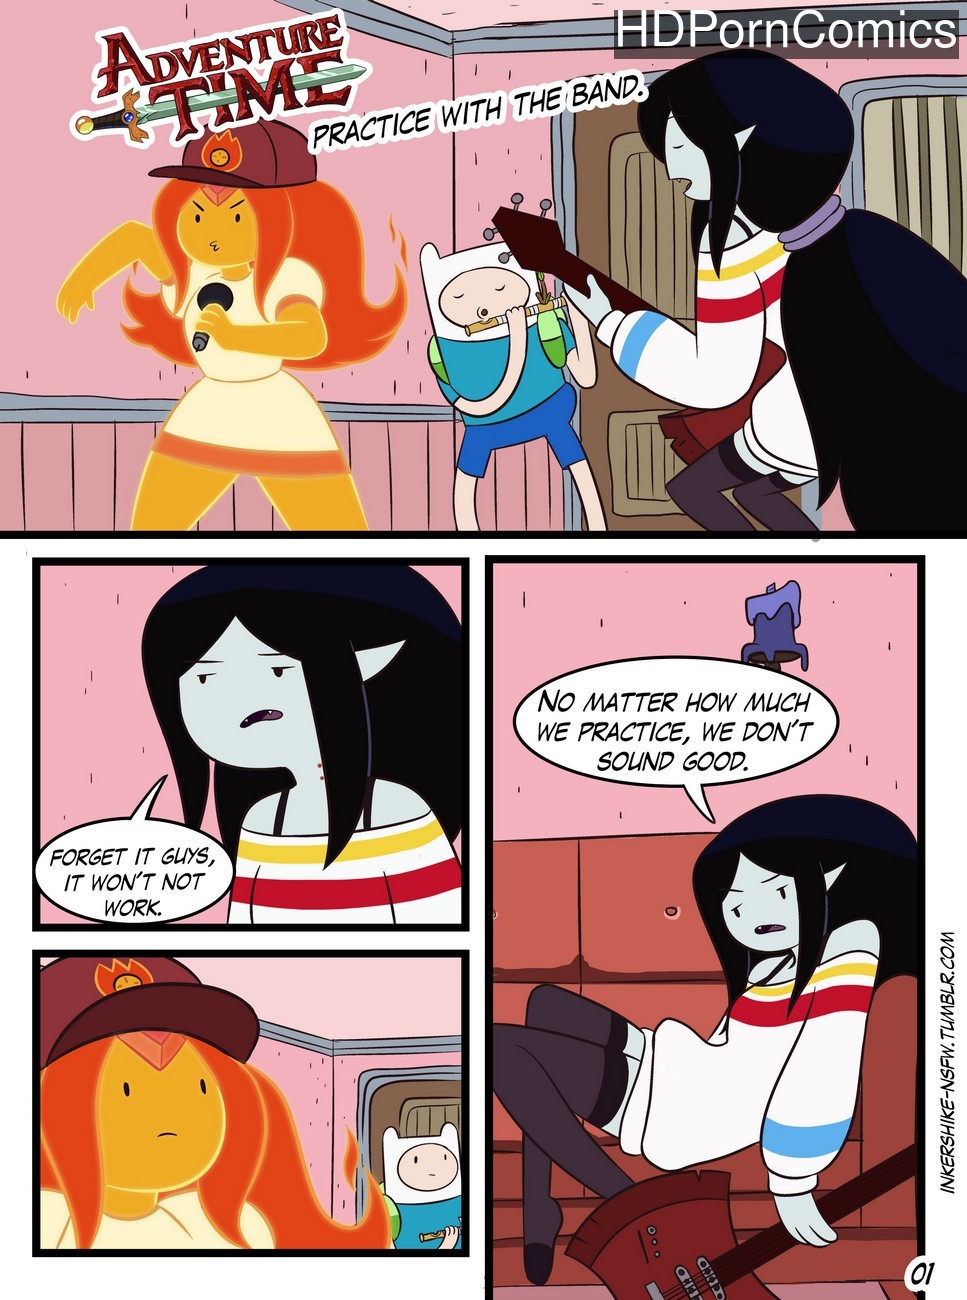 Misadventure Time Porn - Adventure Time - Practice With The Band comic porn | HD Porn Comics